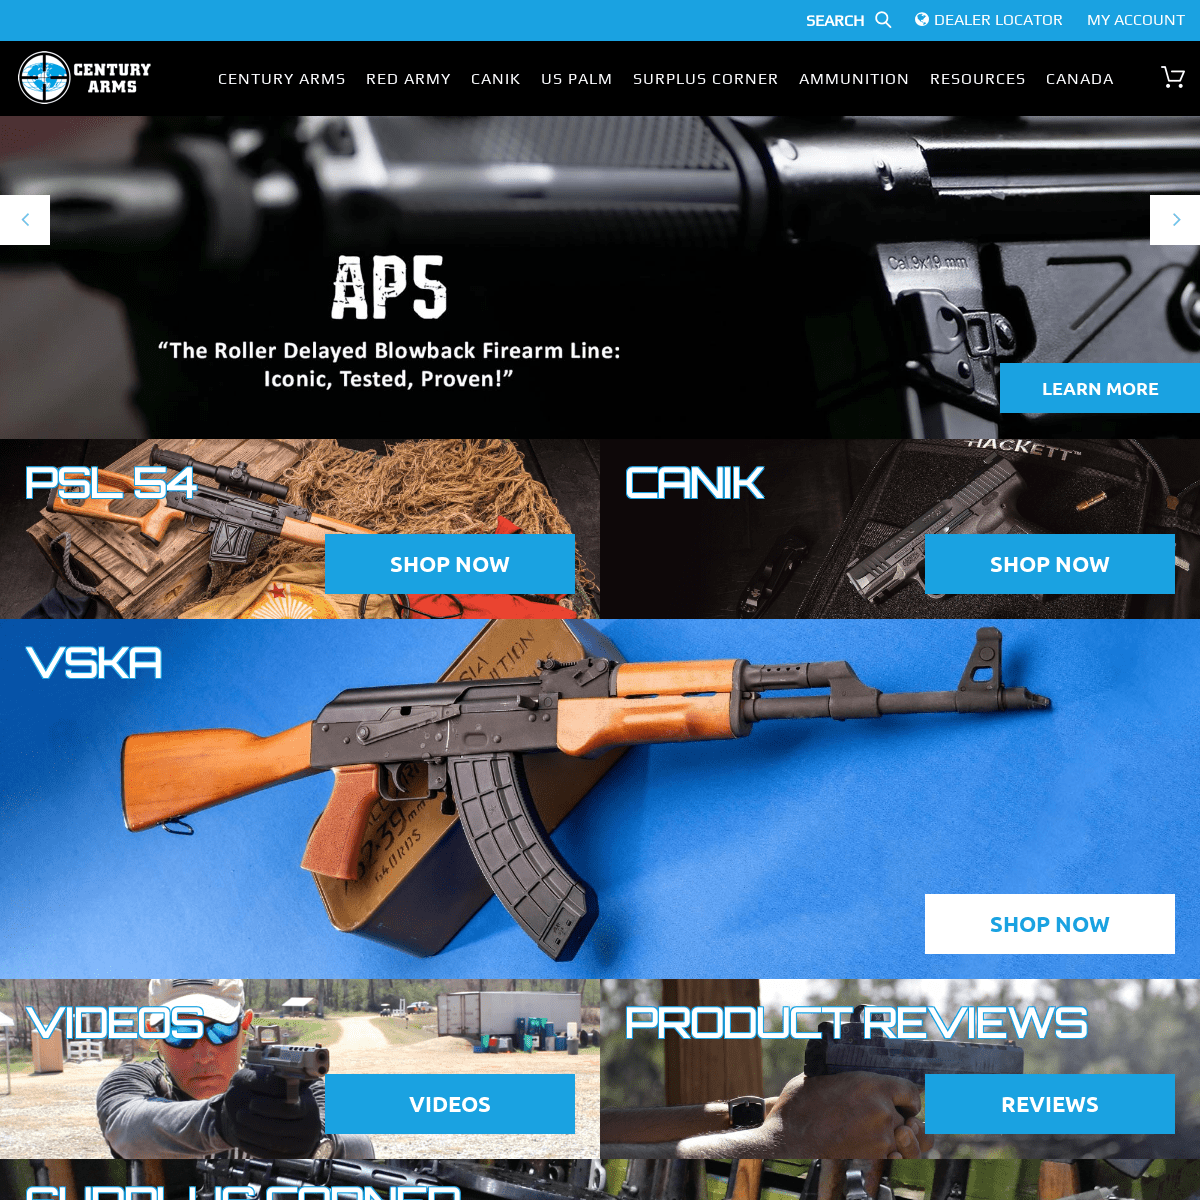 A complete backup of https://centuryarms.com